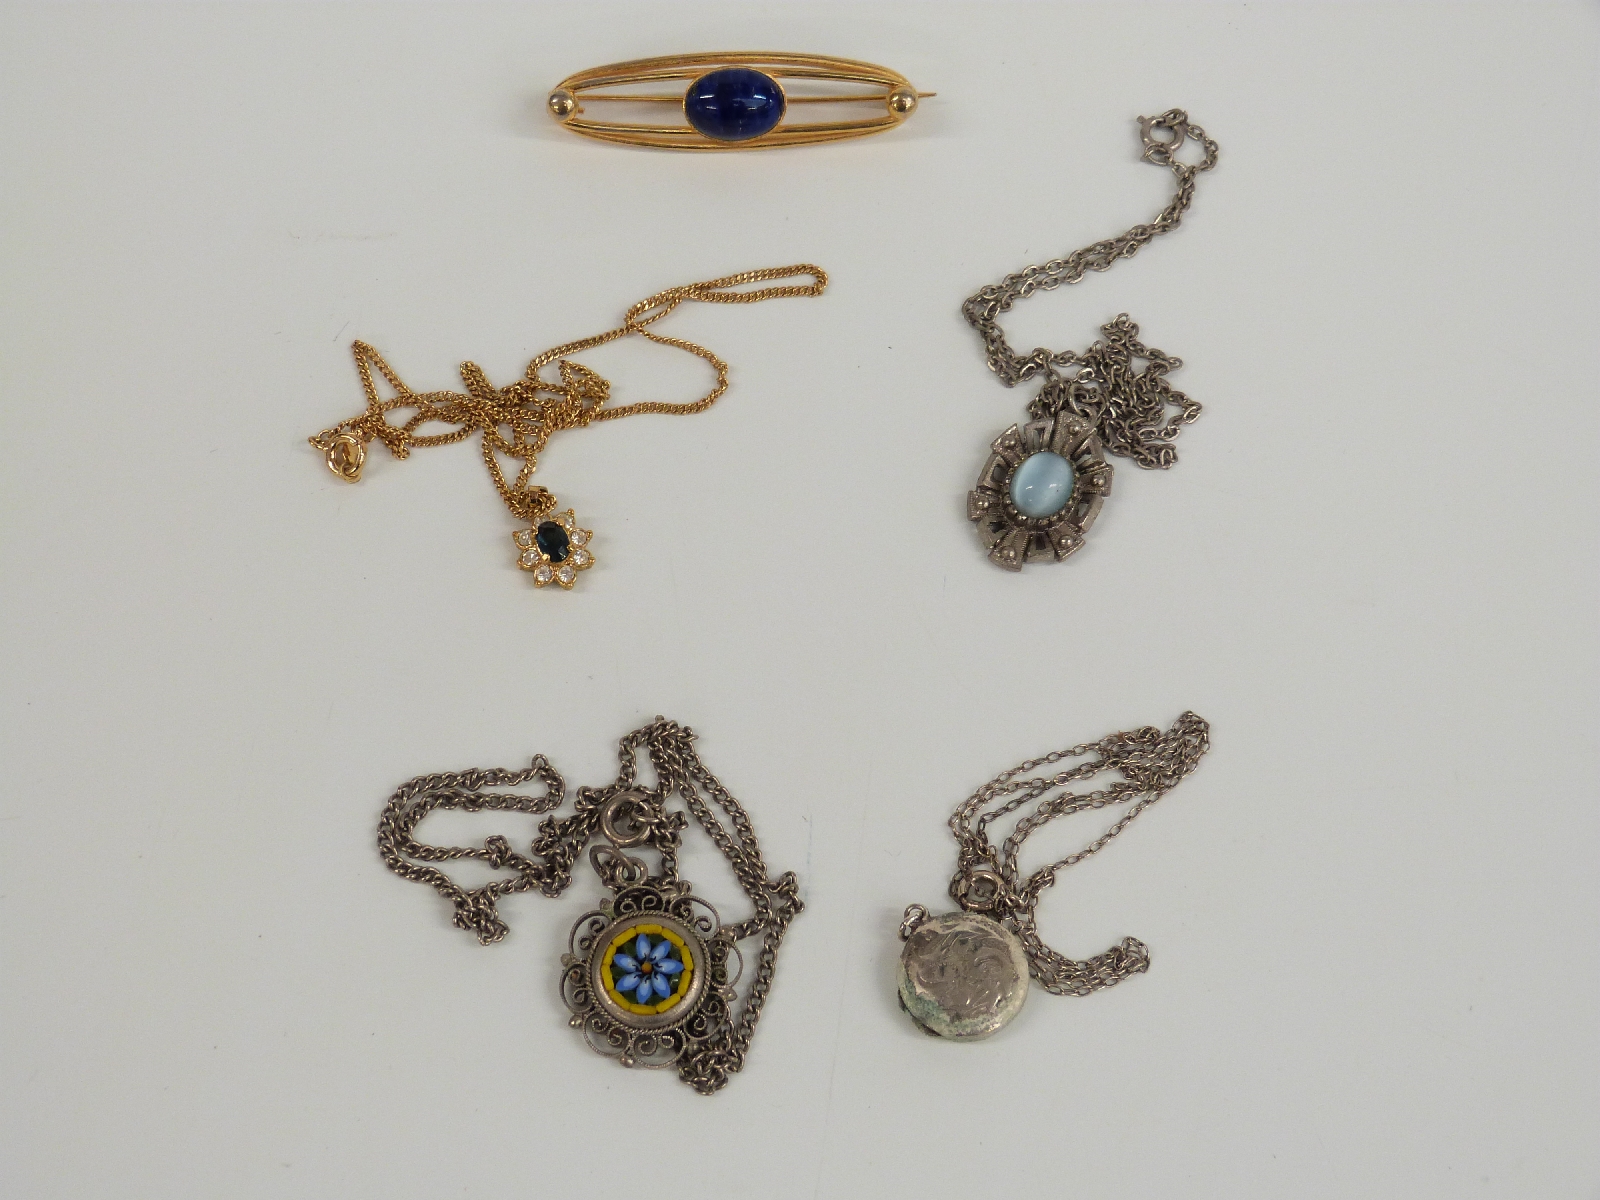 A collection of jewellery including beads, necklaces, Art Nouveau brooch, silver locket, micro - Bild 5 aus 7